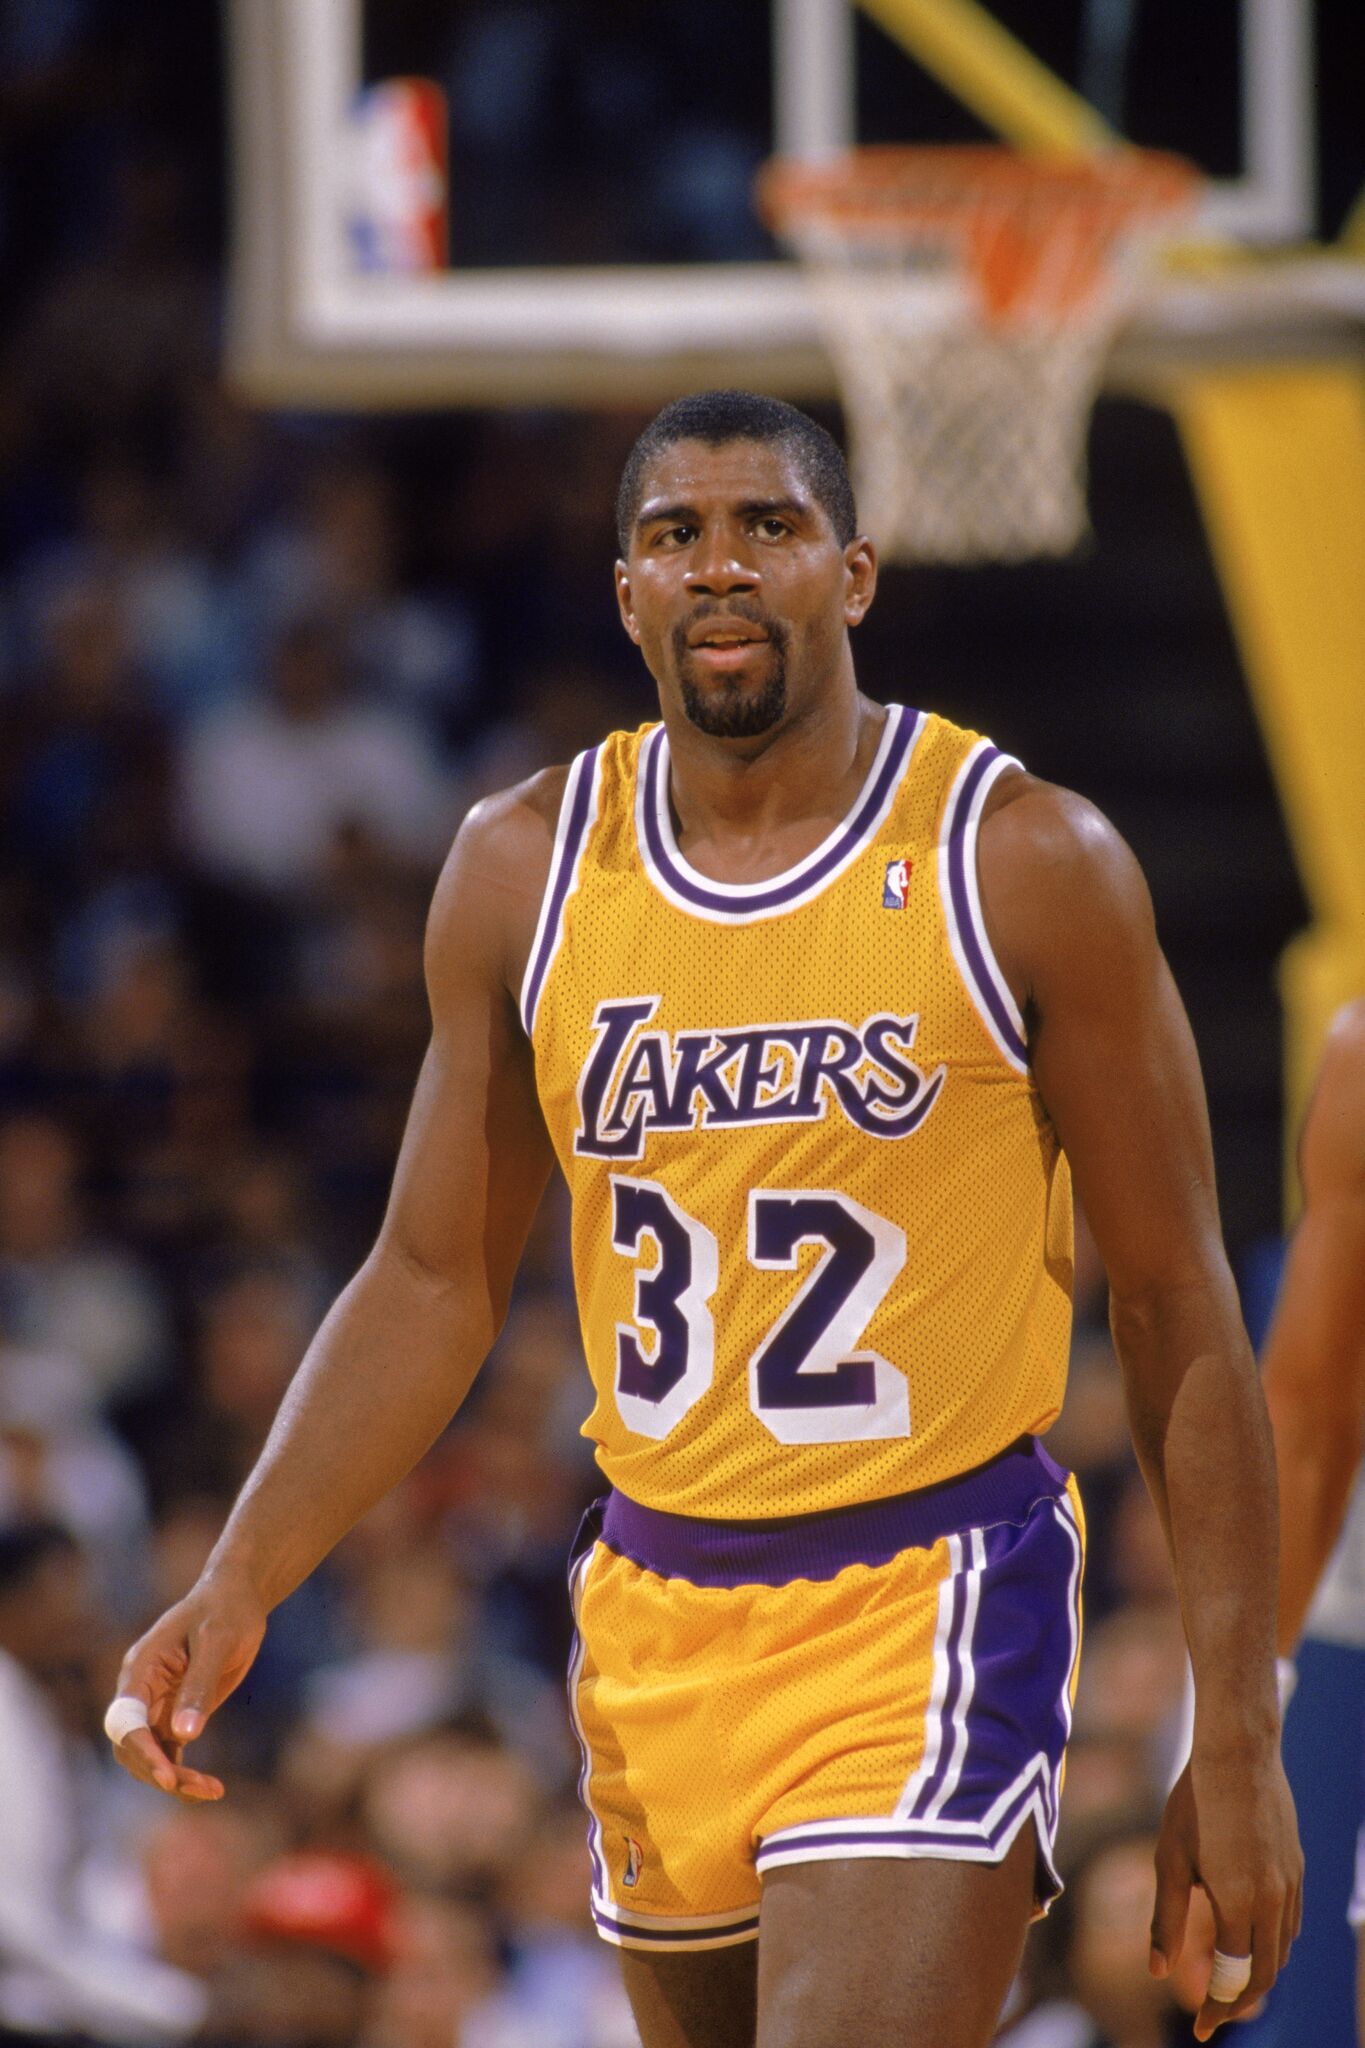 Magic Johnson #32 of the Los Angeles Lakers walks down the court during an NBA game at the Great Western Forum | Getty Images